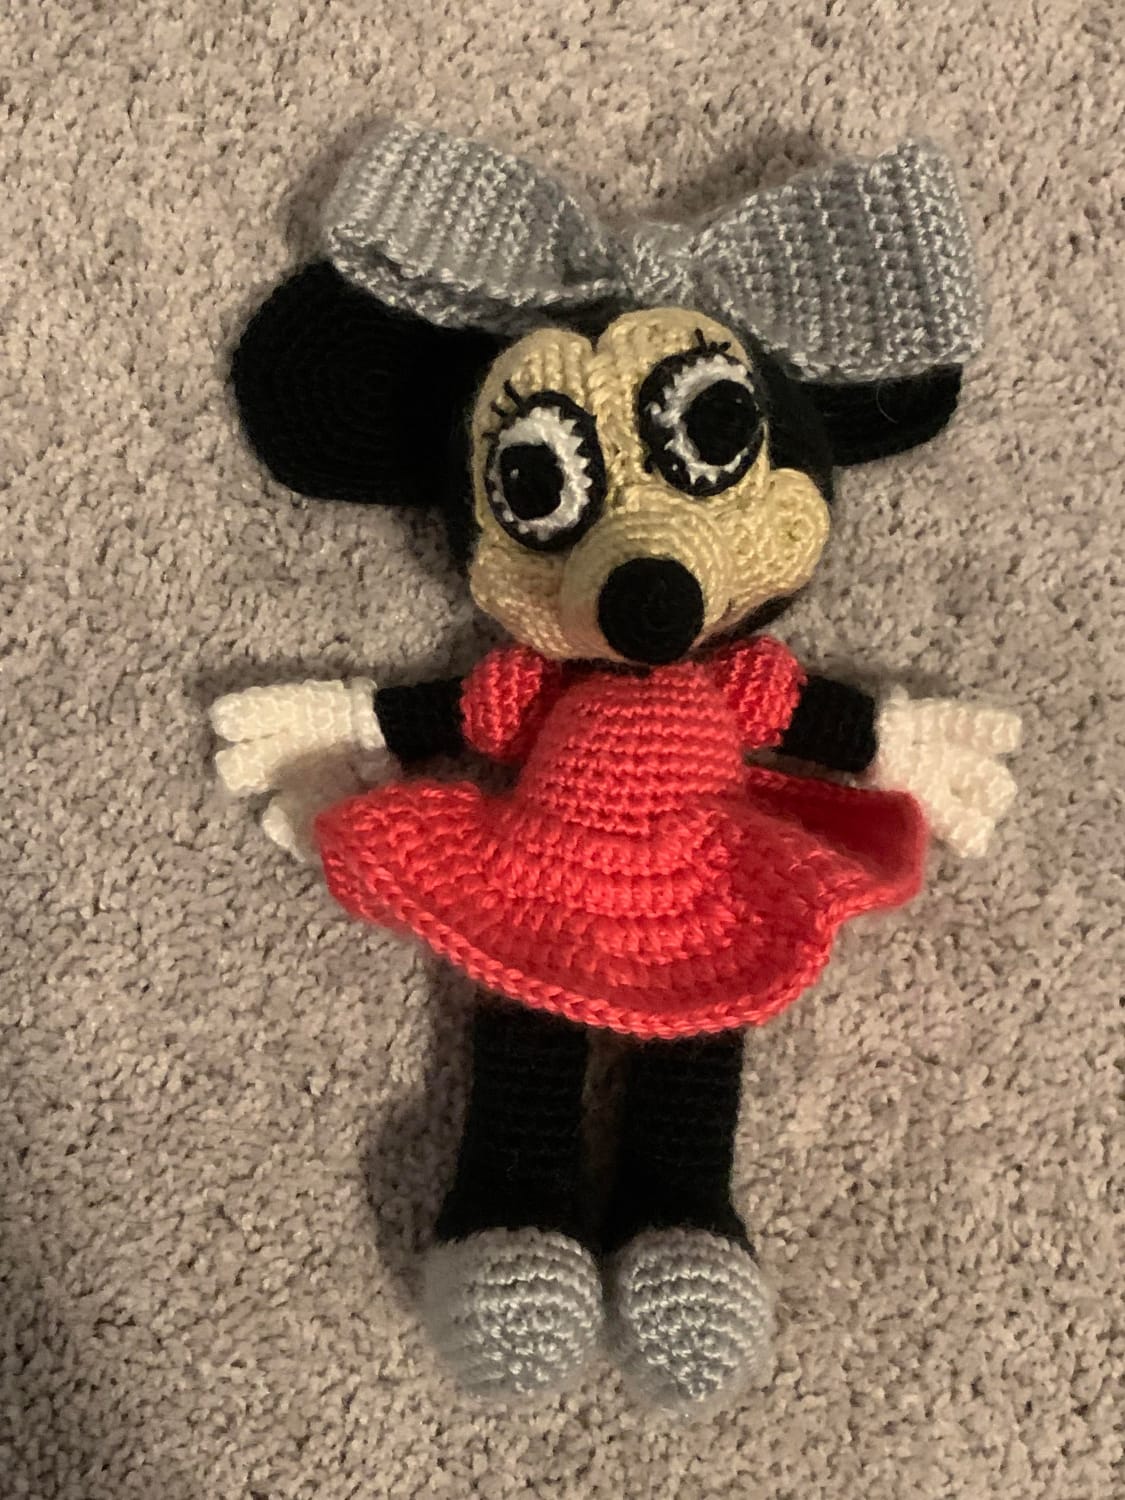 In support of the scary Micky posted earlier, here is cracked out Minnie Mouse